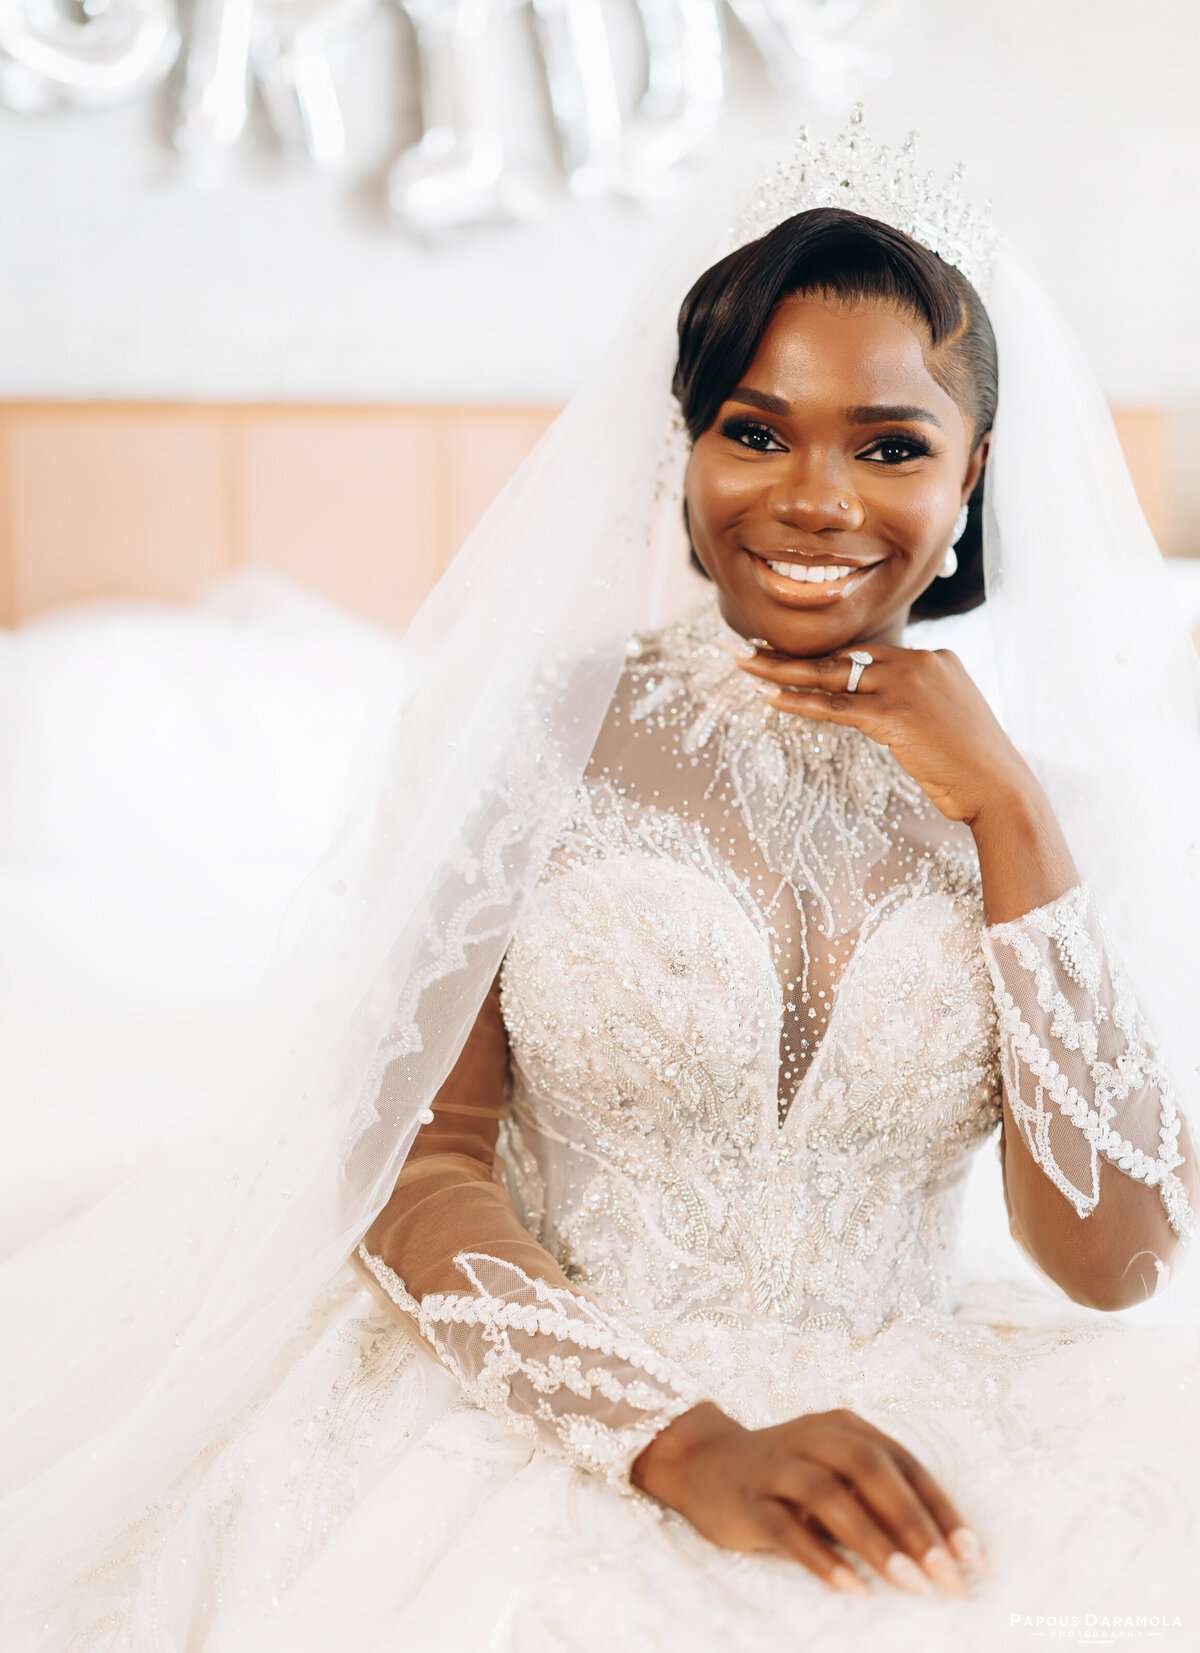 Abigail and Abije Oruka Events Papouse photographer Wedding event planners Toronto planner African Nigerian Eyitayo Dada Dara Ayoola outdoor ceremony floral princess ballgown rolls royce groom suit potraits  paradise banquet hall vaughn 91